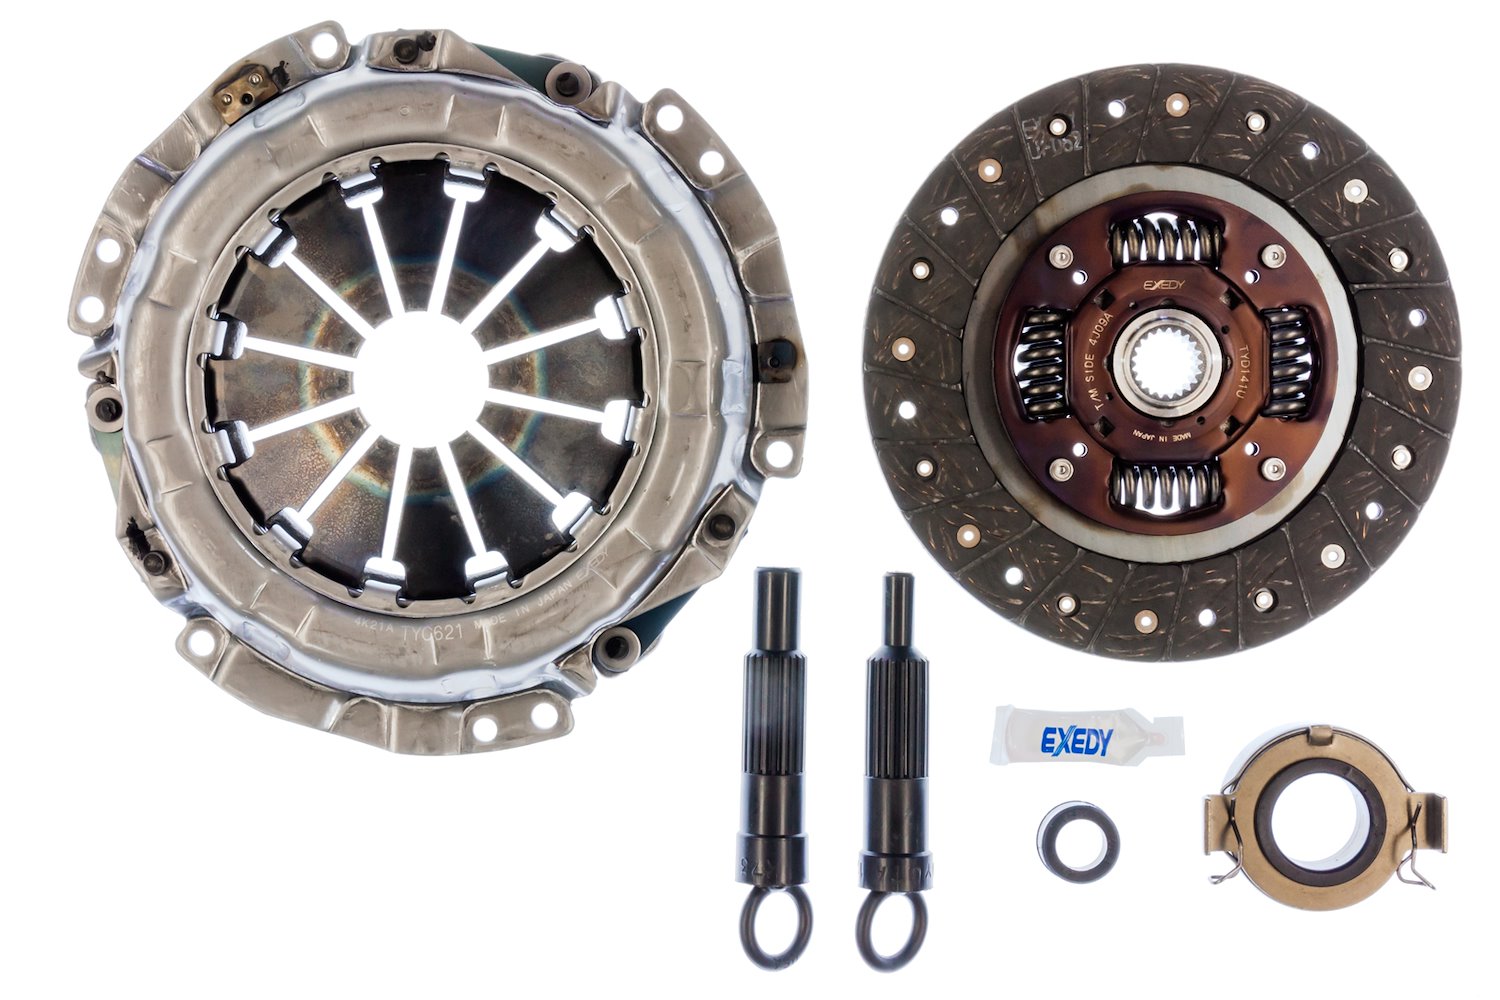 TYK1501 OEM Replacement Transmission Clutch Kit, 2003-2008 Toyota Corolla L4